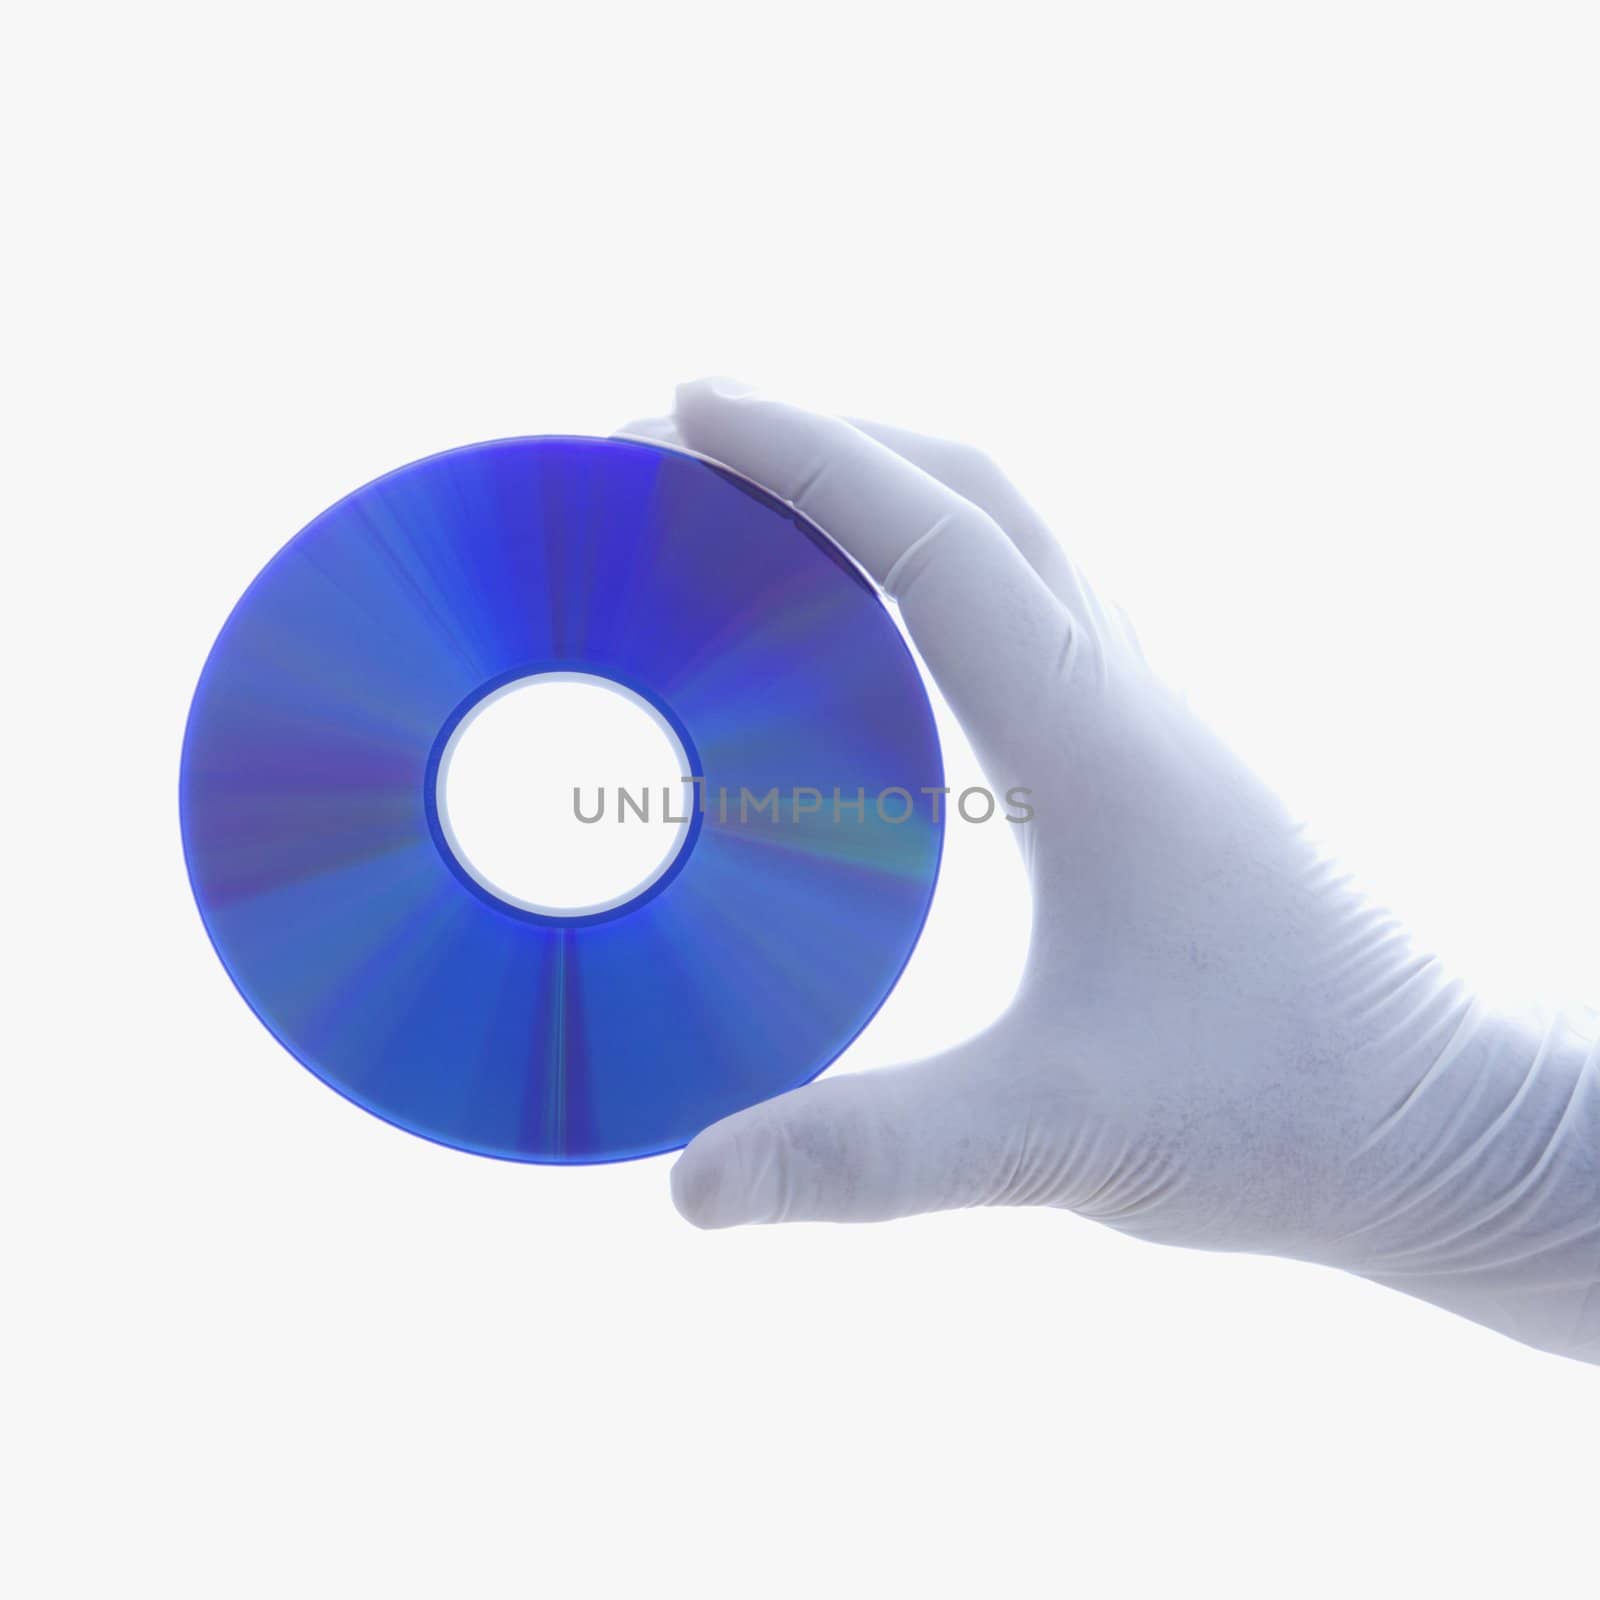 Hand in latex glove holding compact disc against white background.